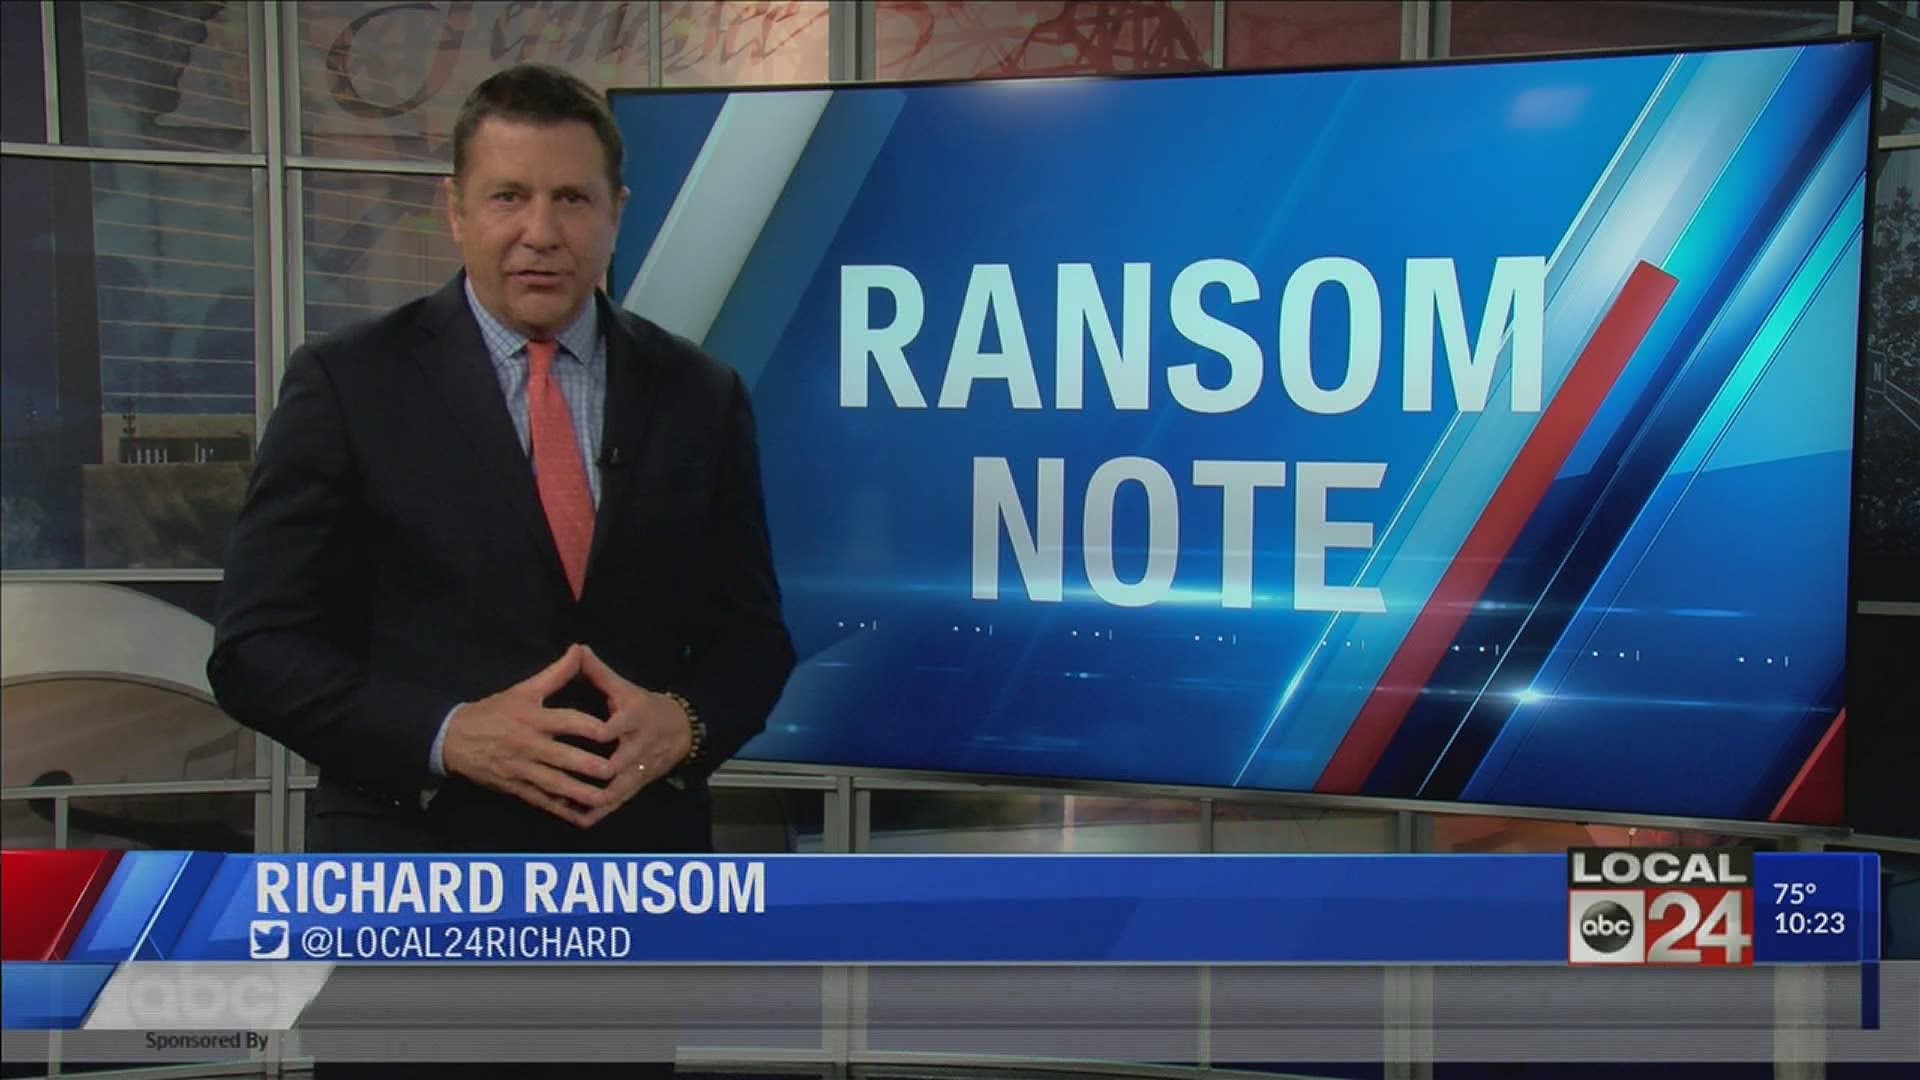 Local 24 News anchor Richard Ransom looks at the results of a survey by the U.S. Census Bureau in his Ransom Note.